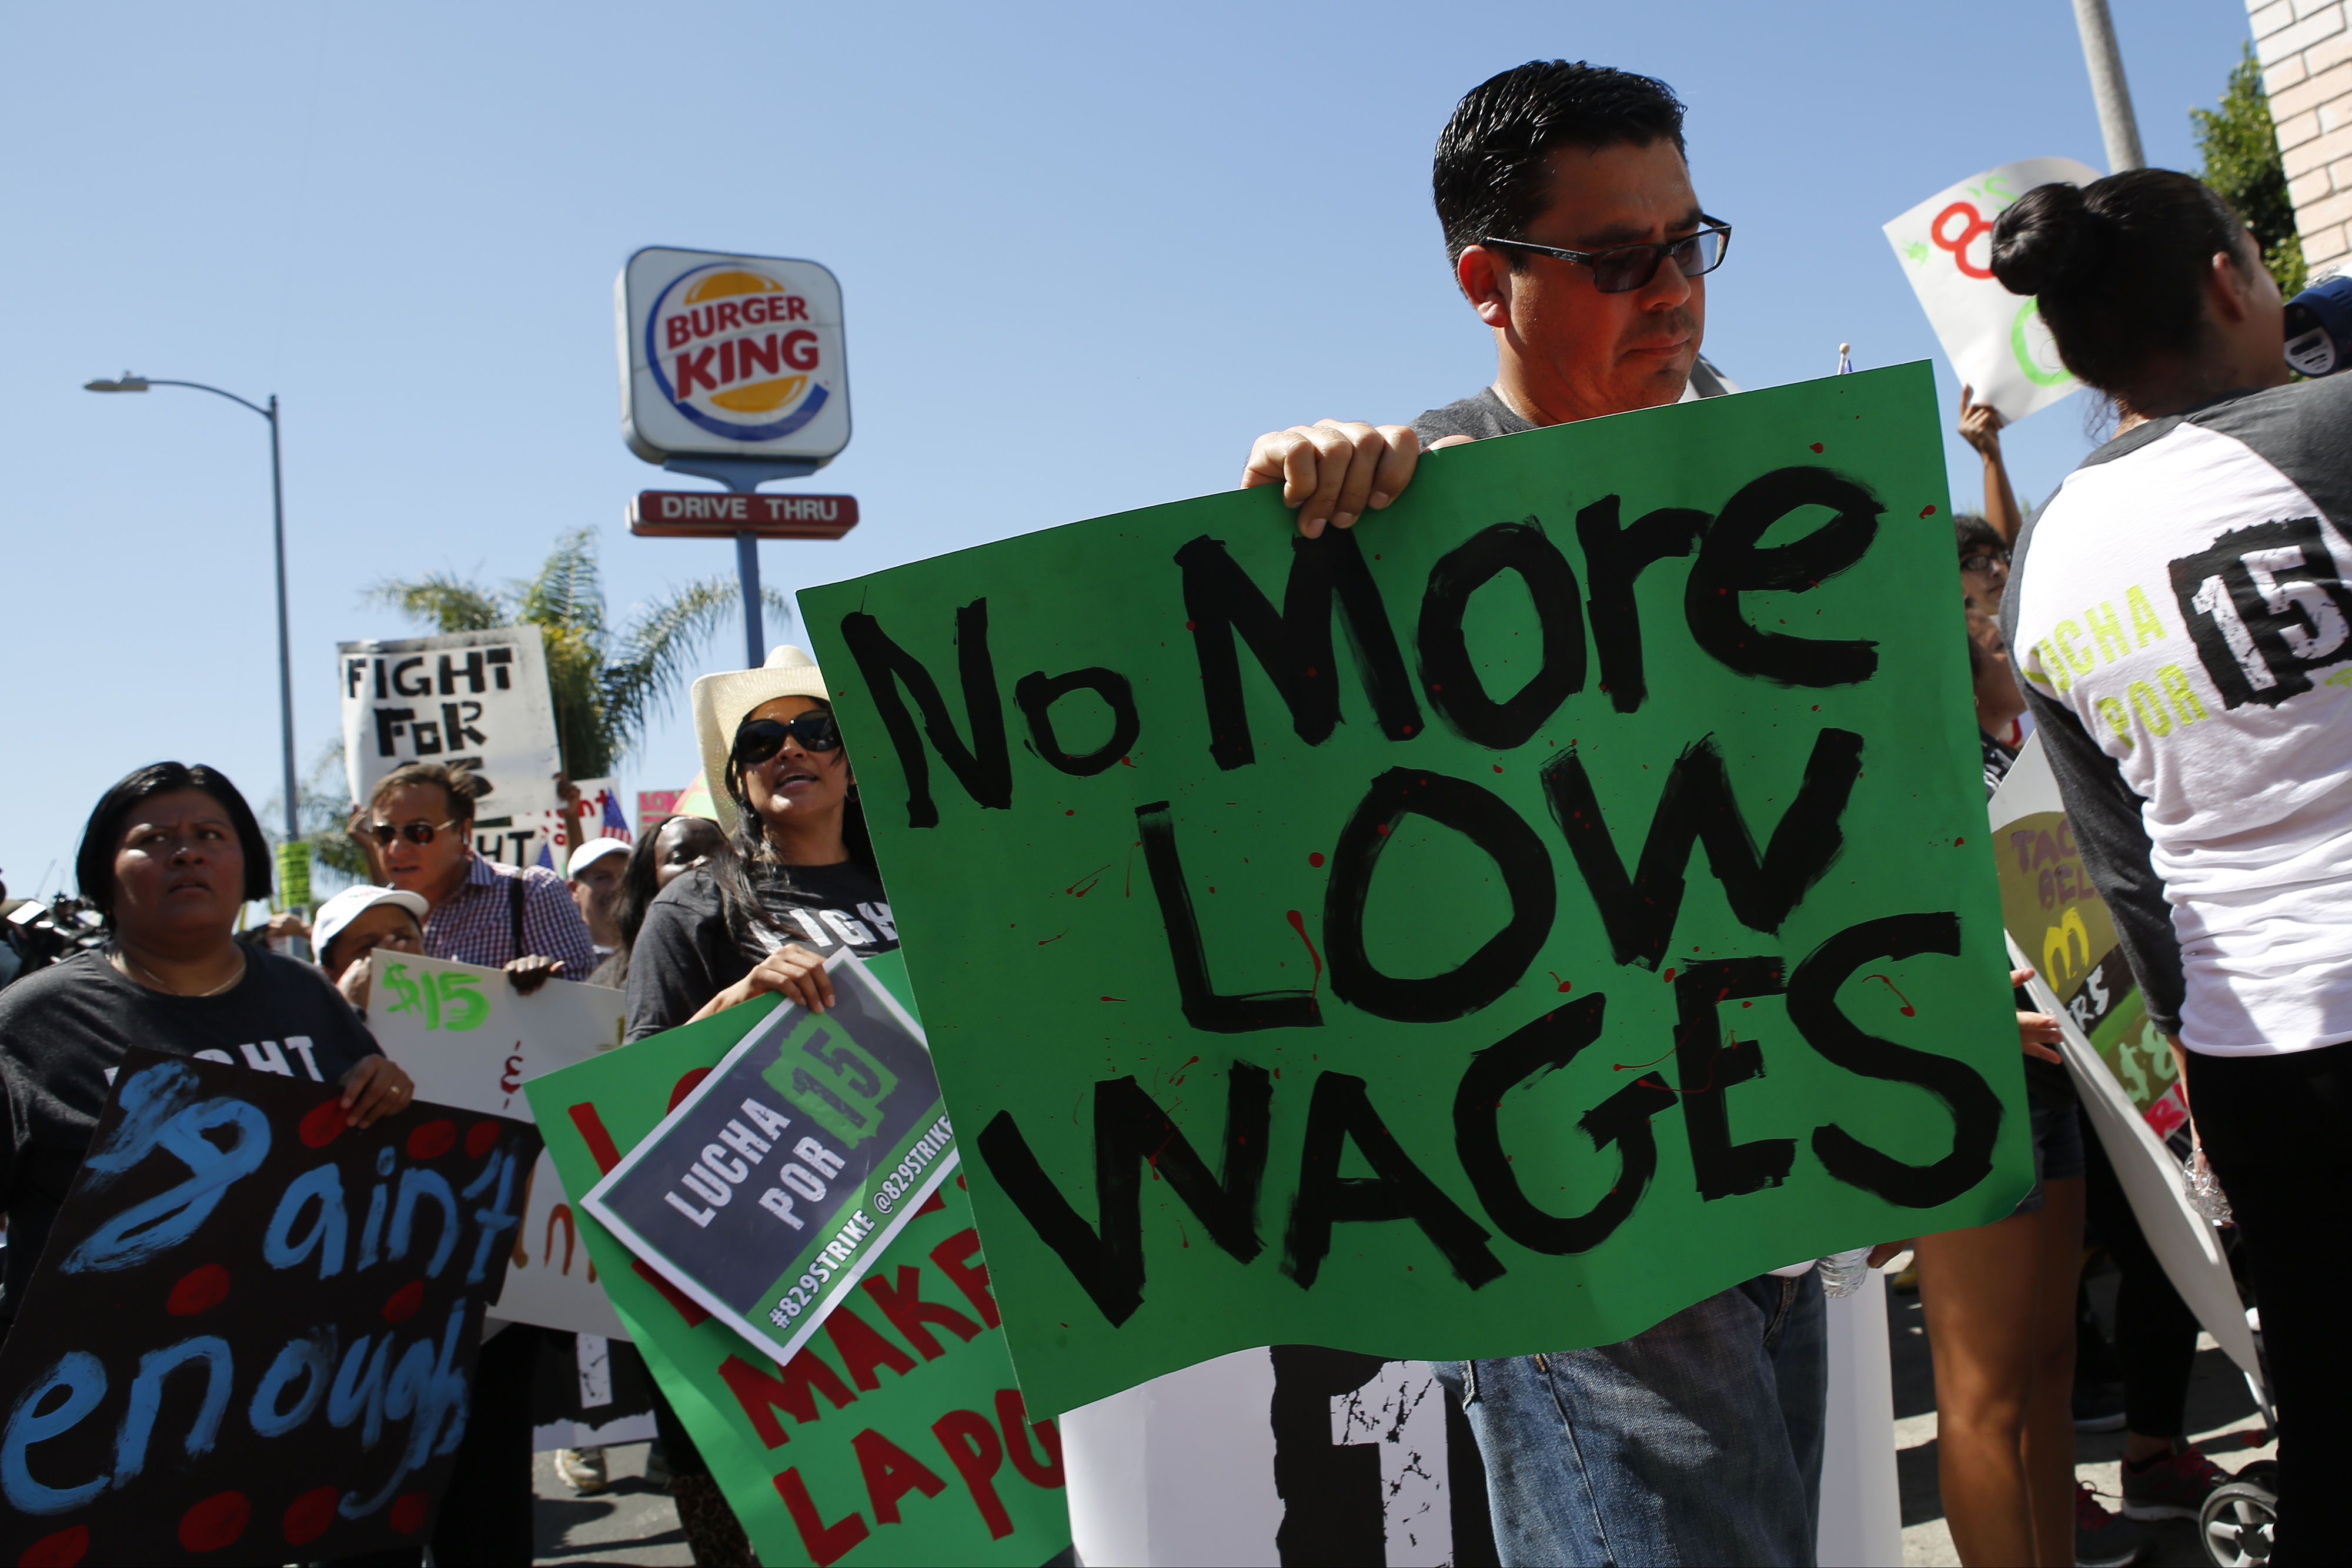 Fast-food workers and supporters organized by the Service Employees International Union (SEIU) protest outside of a Burger King Worldwide Inc. restaurant in Los Angeles, California, U.S., on Thursday, Aug. 29, 2013. (Bloomberg—Bloomberg via Getty Images)